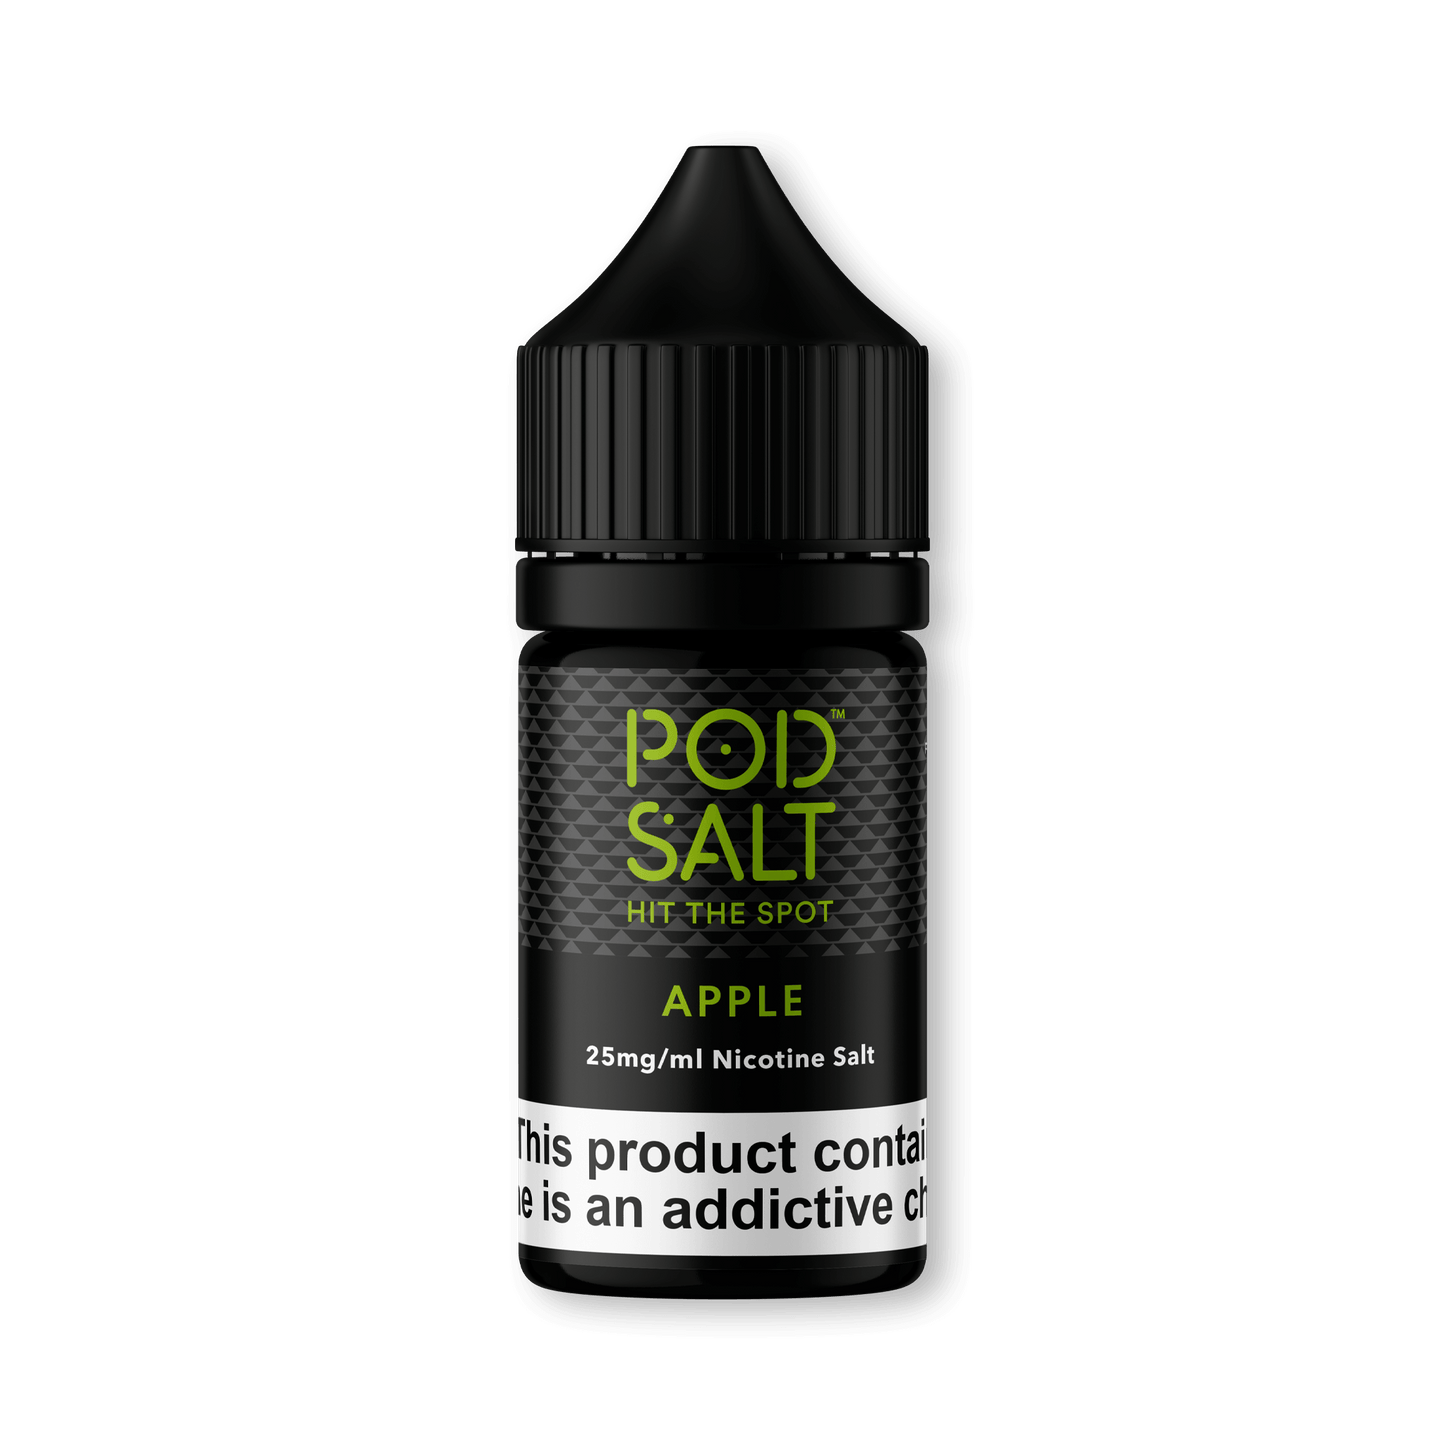 APPLE - POD SALT CORE - 30ML - ICONA VAPE25MGauthentic apple flavor delightful sweetness crispness freshly picked apples orchard-fresh award-winning Nicotine Salts formula unparalleled vaping experience ICONA VAPE exclusive Shop now Flavour profile: Apple 30ml bottle size 50VG/50PG ratio Made in the UK TPD Compliant